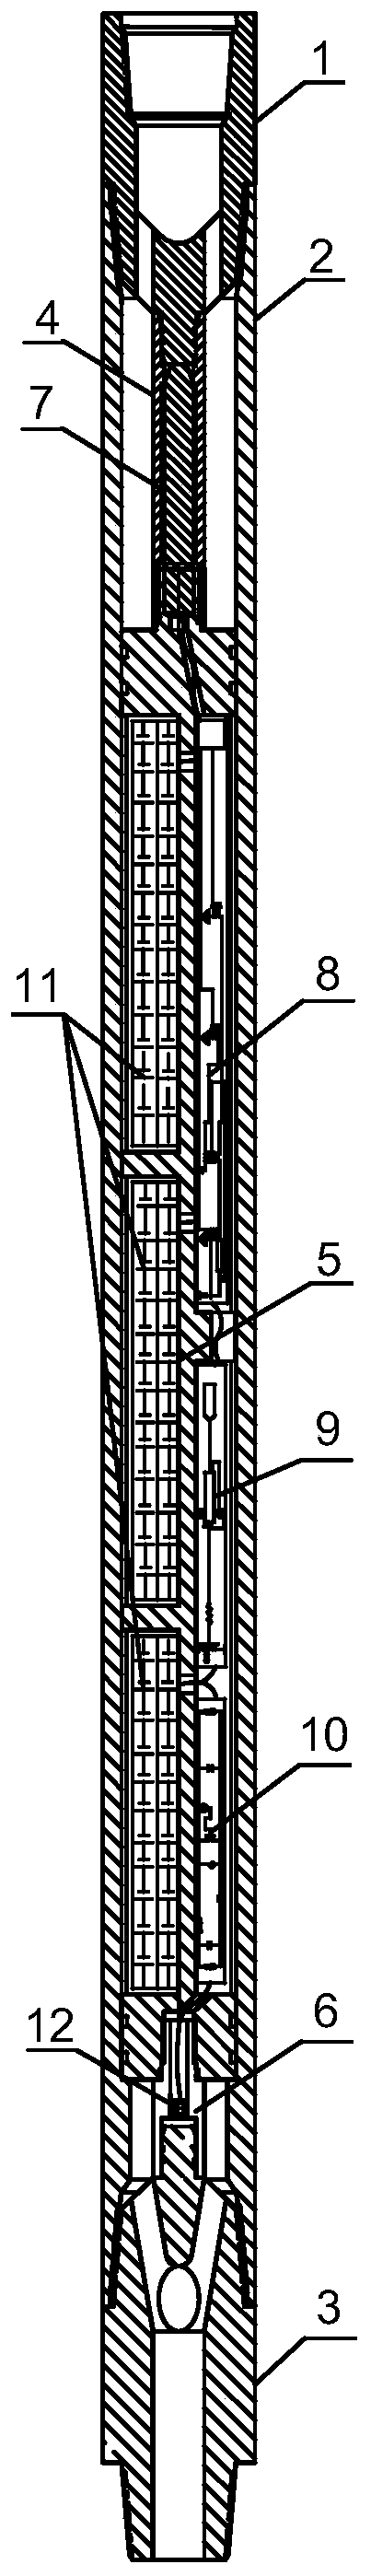 Downhole Information Acoustic Signal Relay System